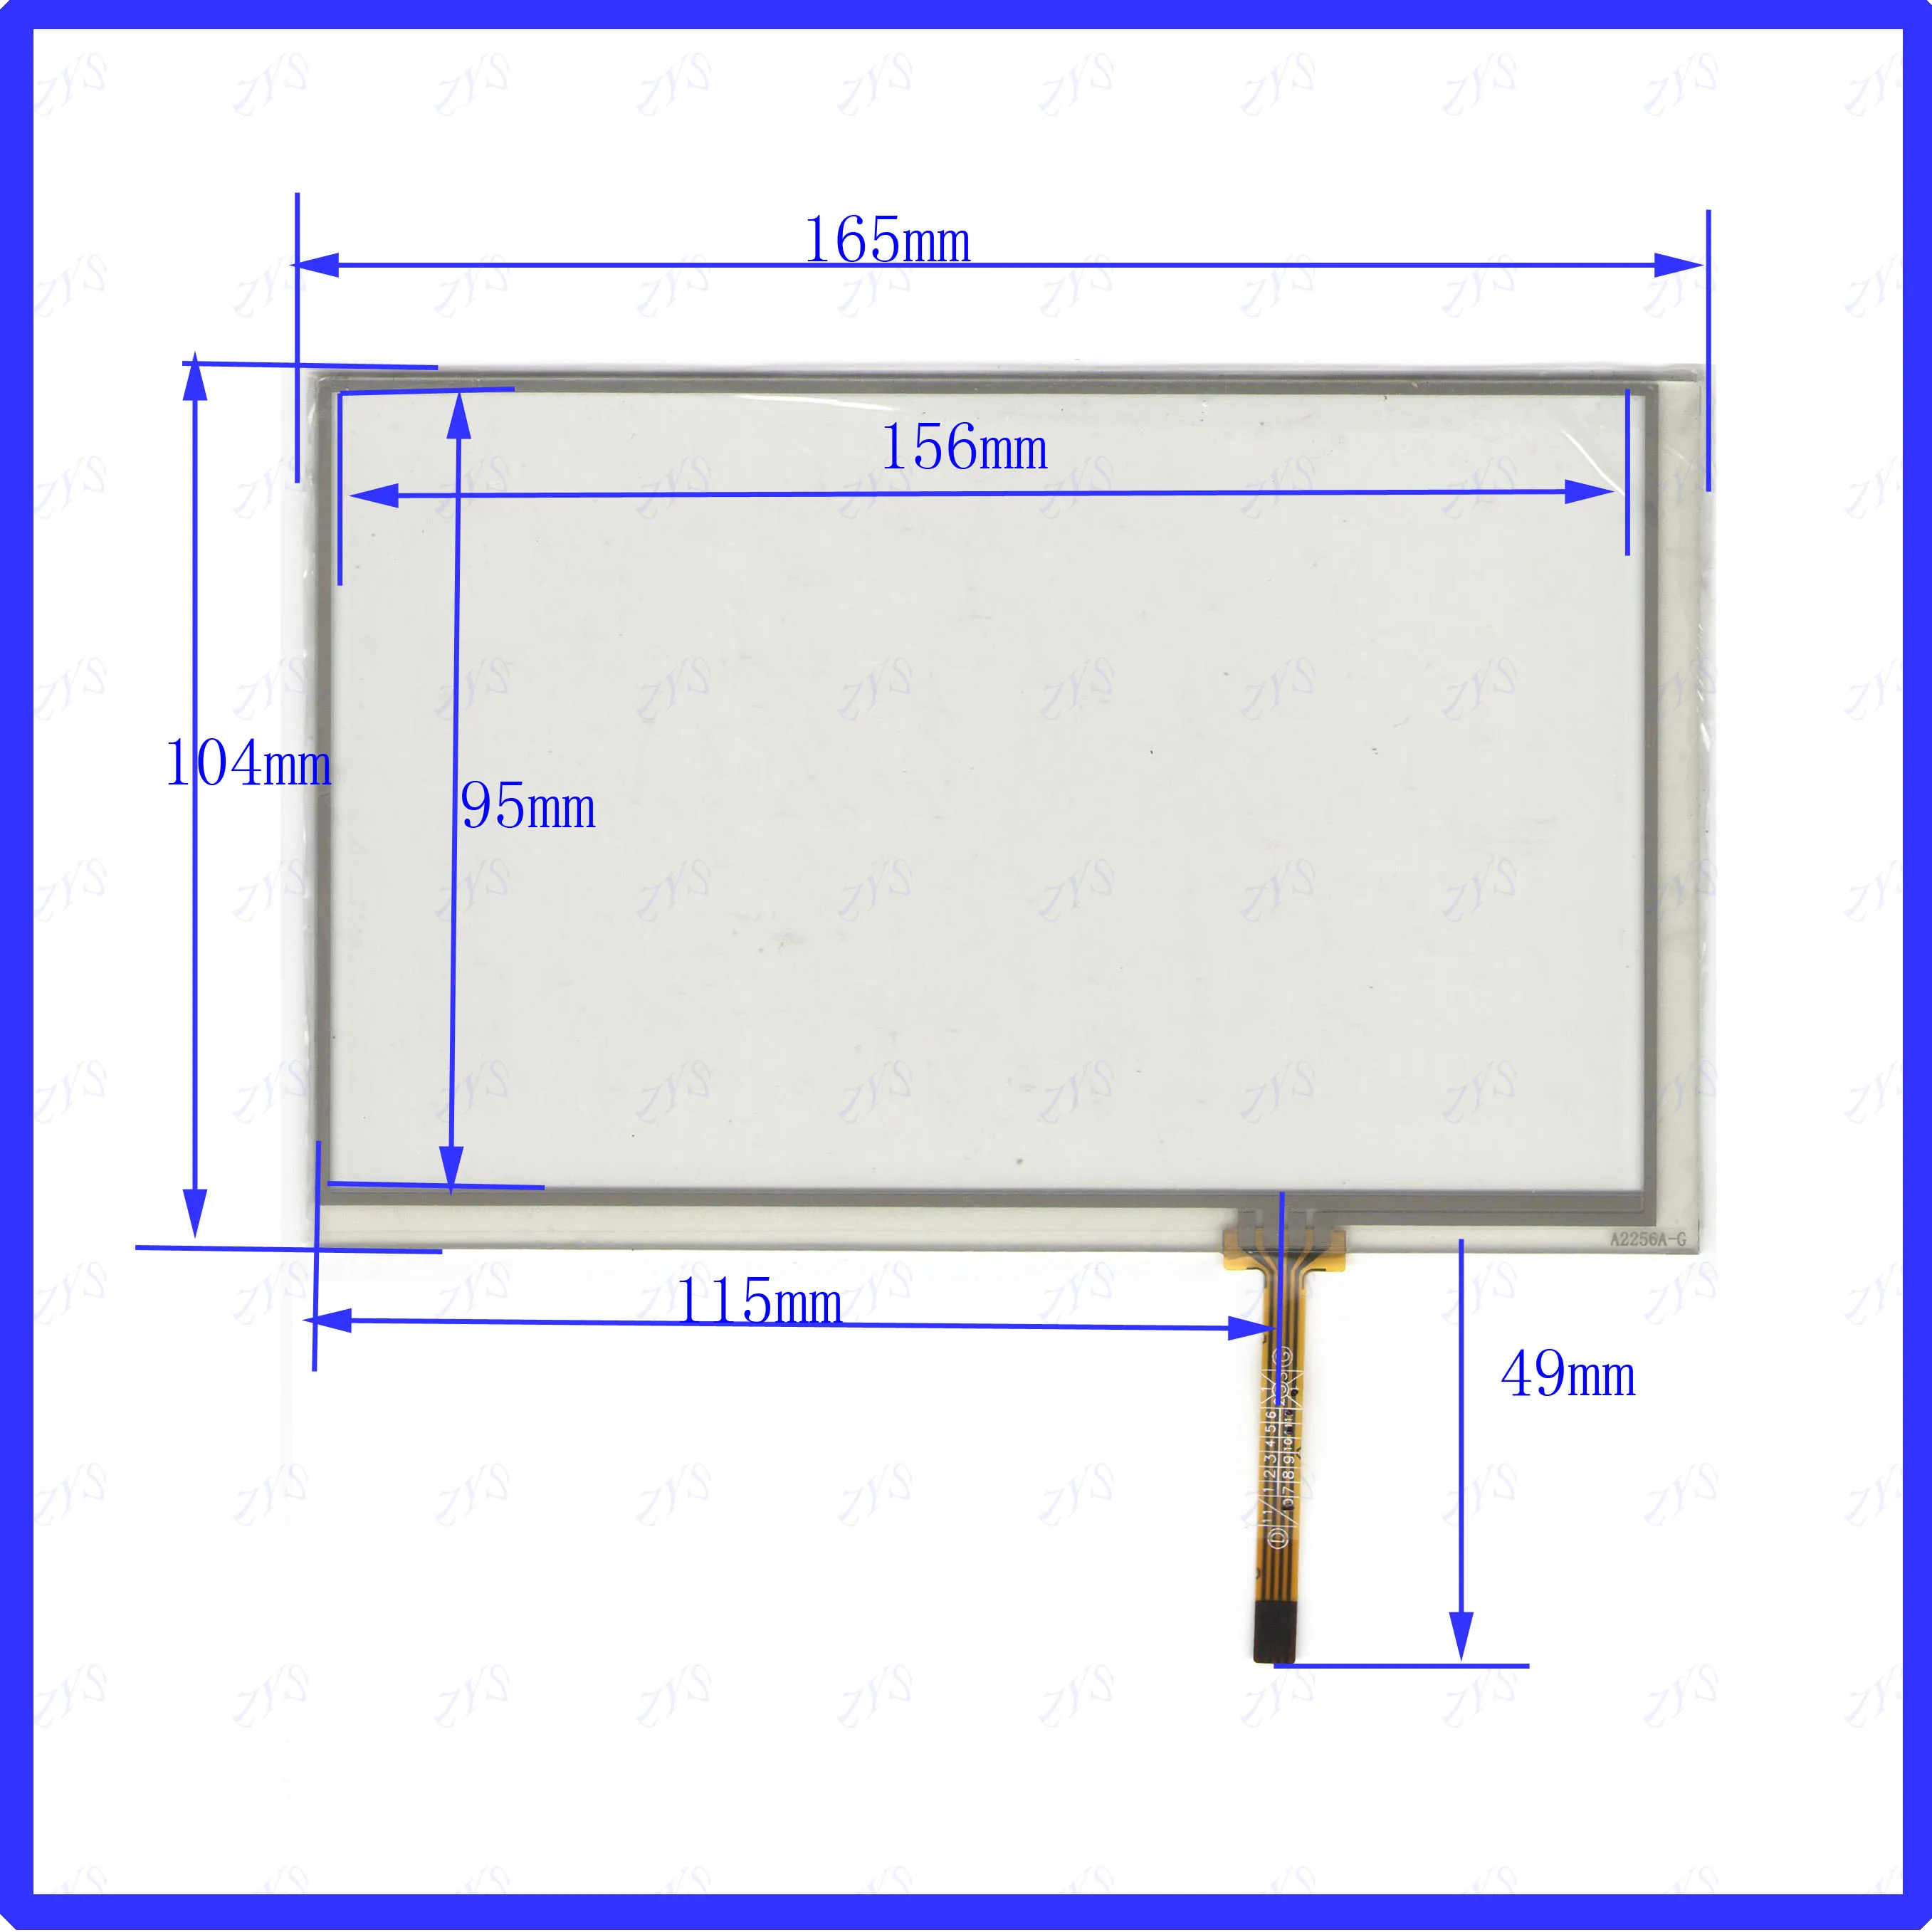 ZhiYuSun KDT-5789 7inch 4Wire Resistive TouchScreen Panel Digitizer this is compatible KDT5789